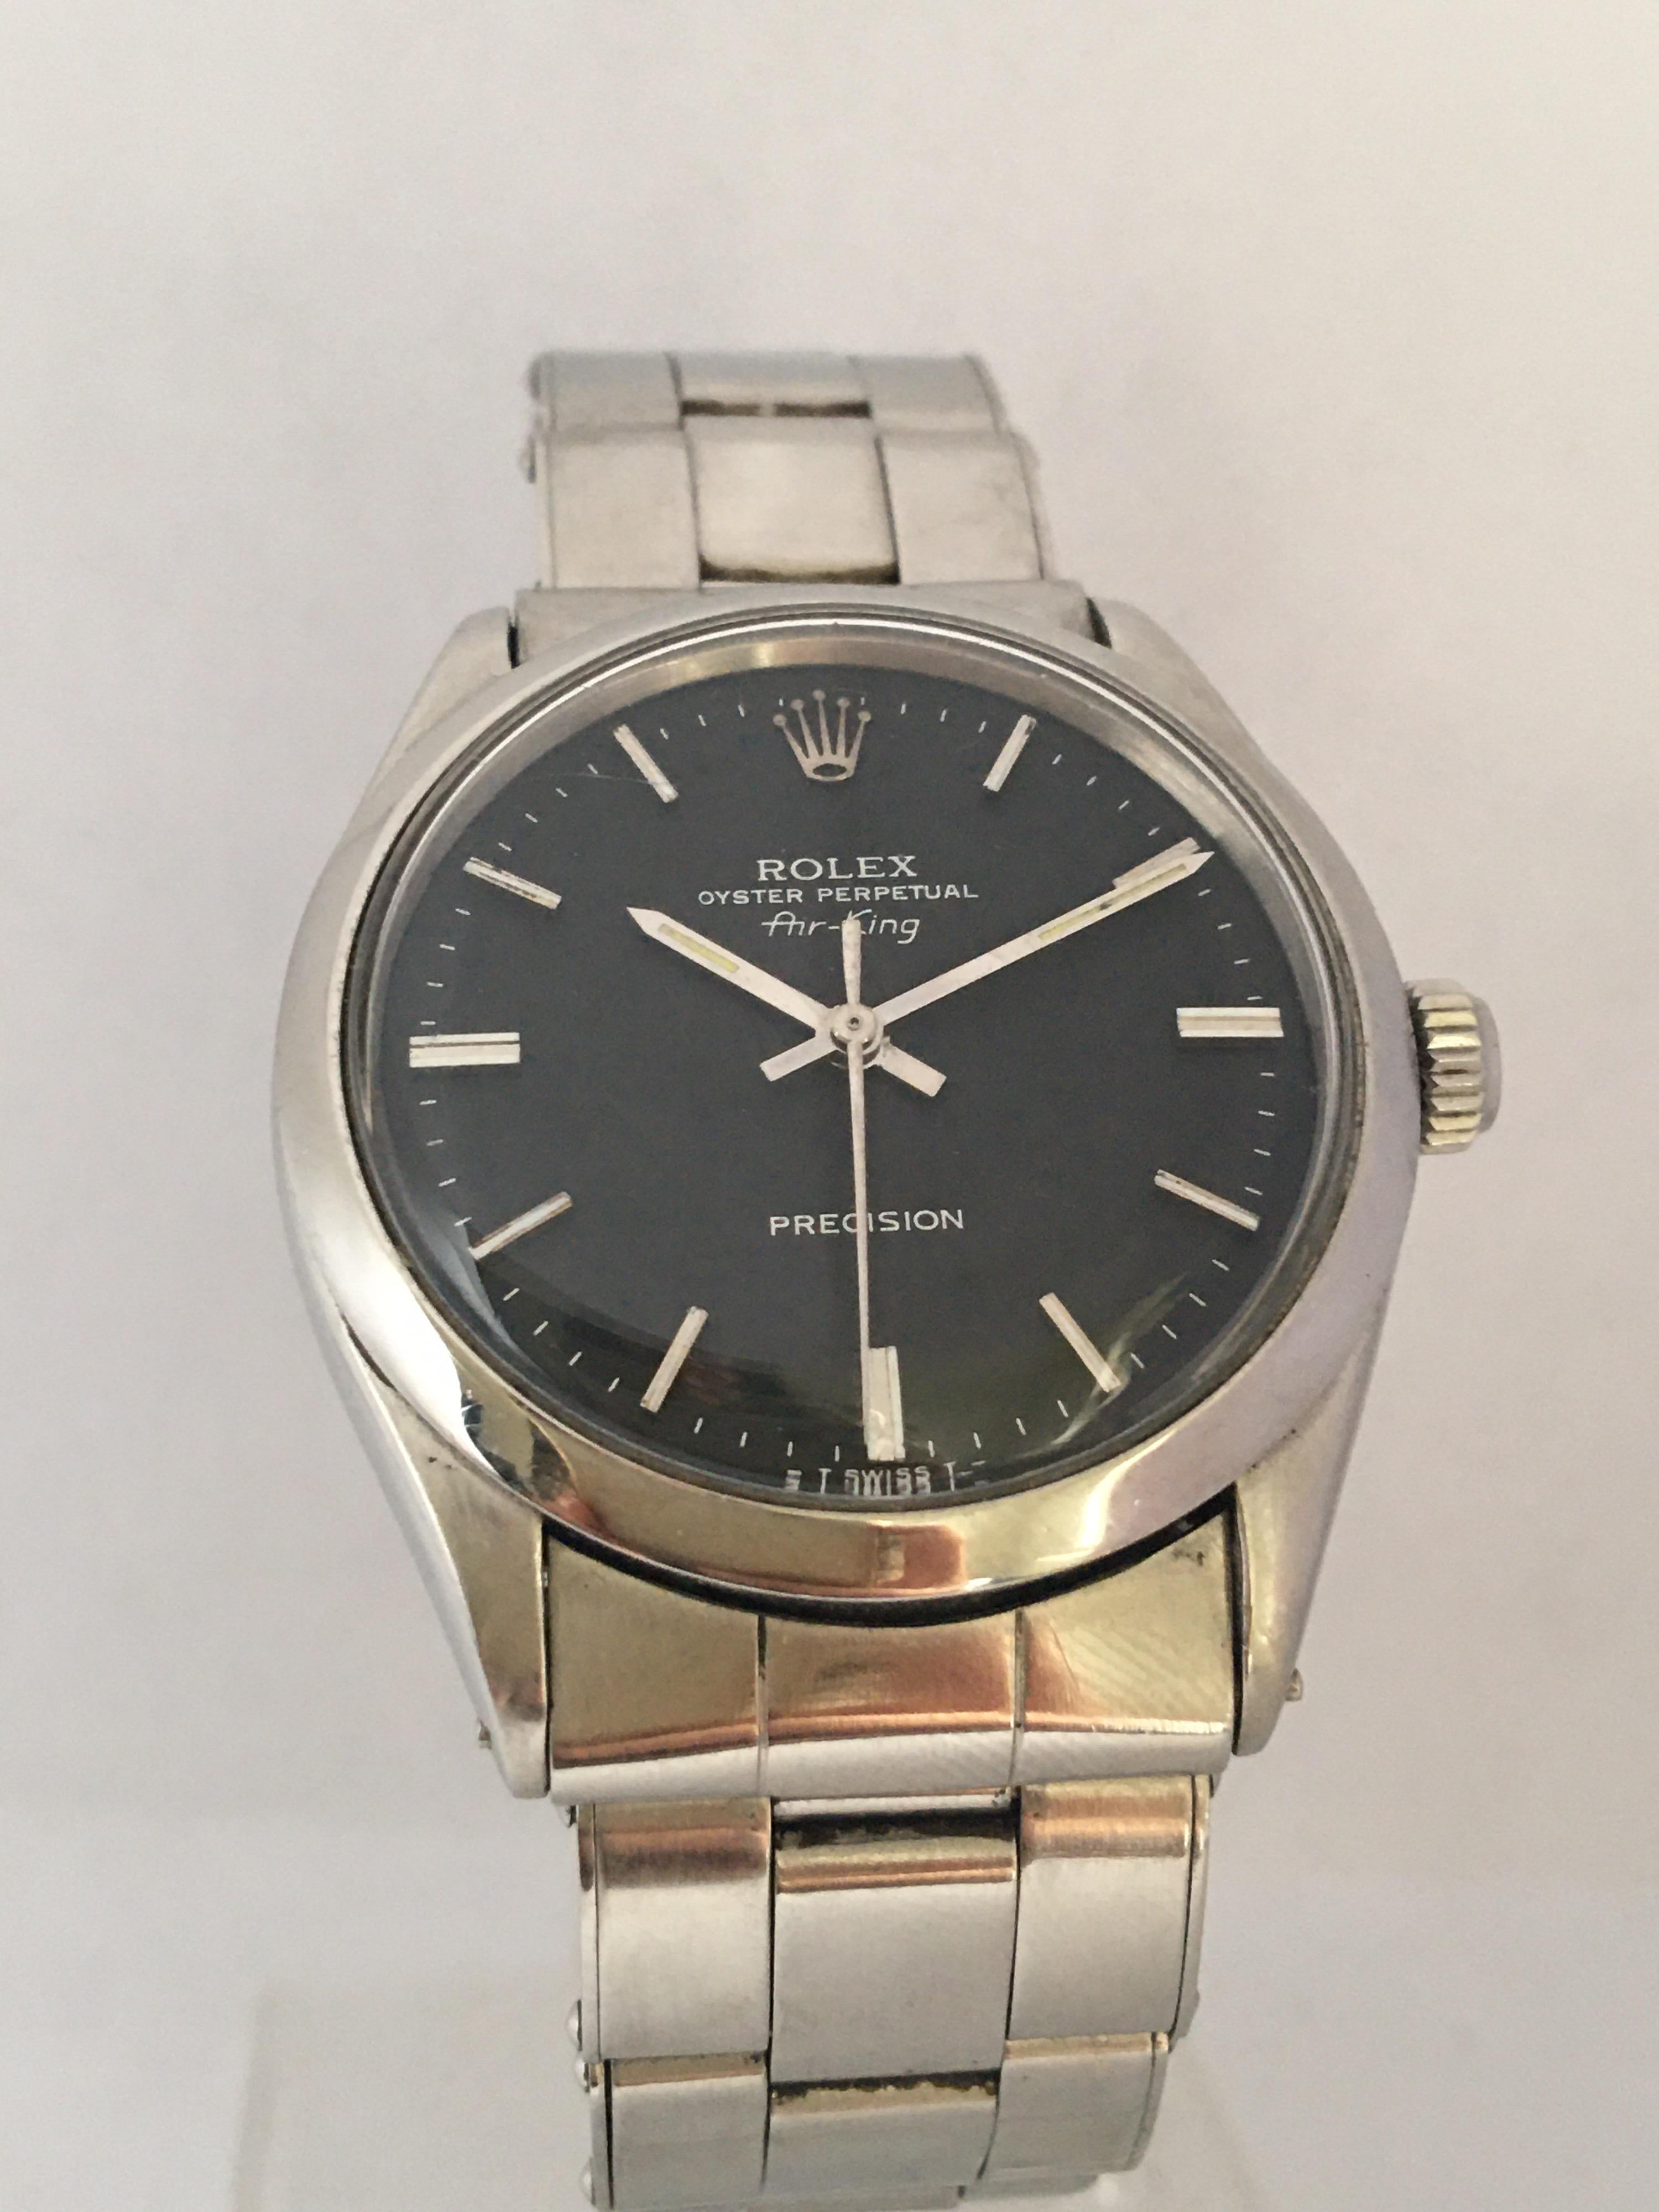 1960s SS Rolex Oyster Perpetual Air-King Precision, 1520 Mechanical Watch For Sale 3